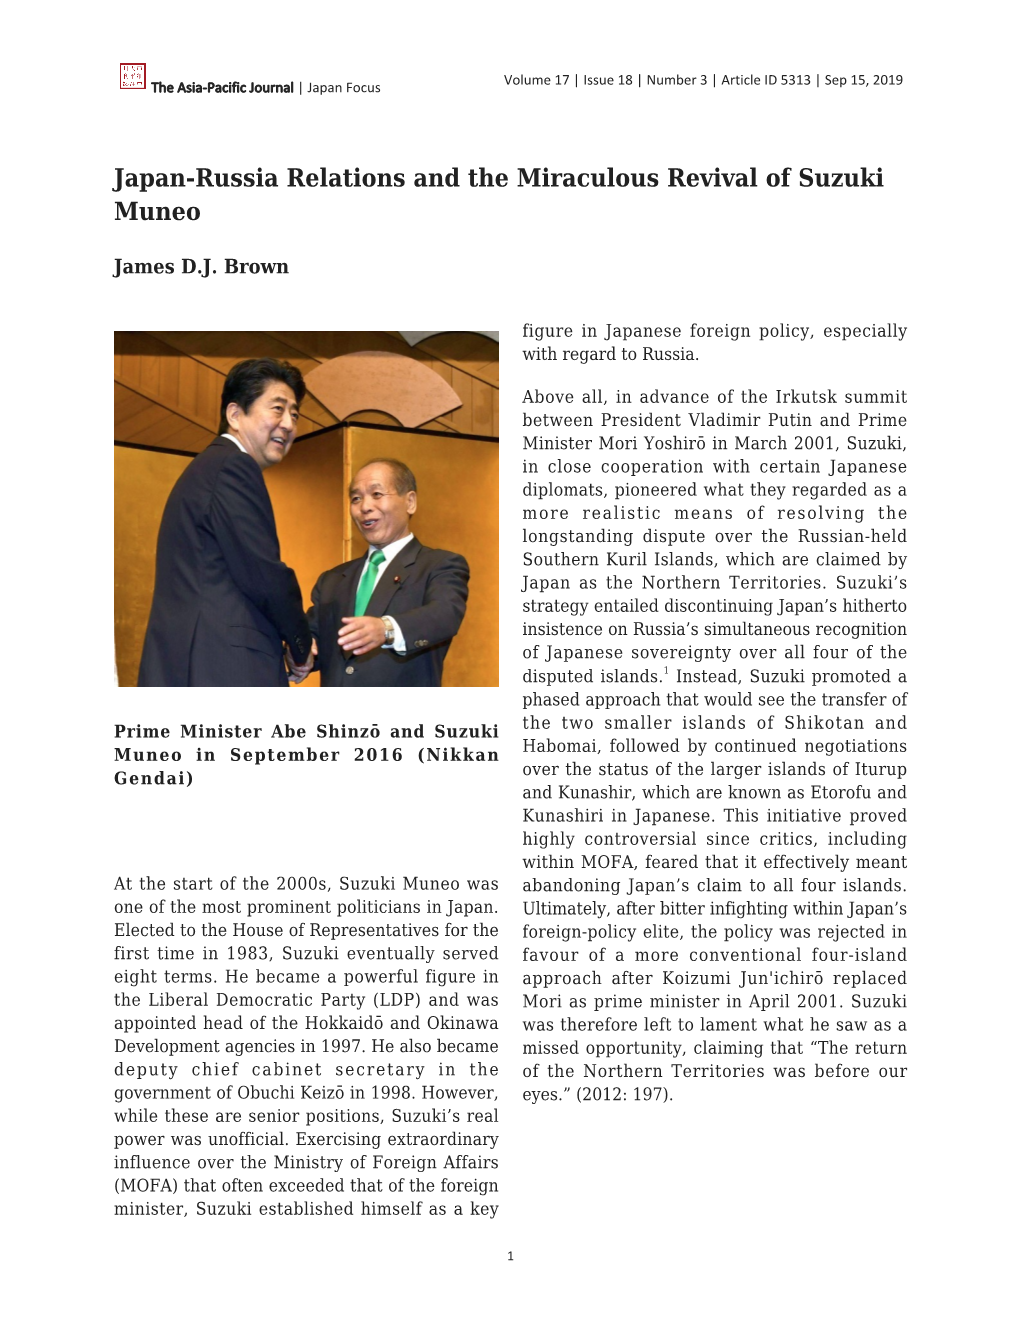 Japan-Russia Relations and the Miraculous Revival of Suzuki Muneo